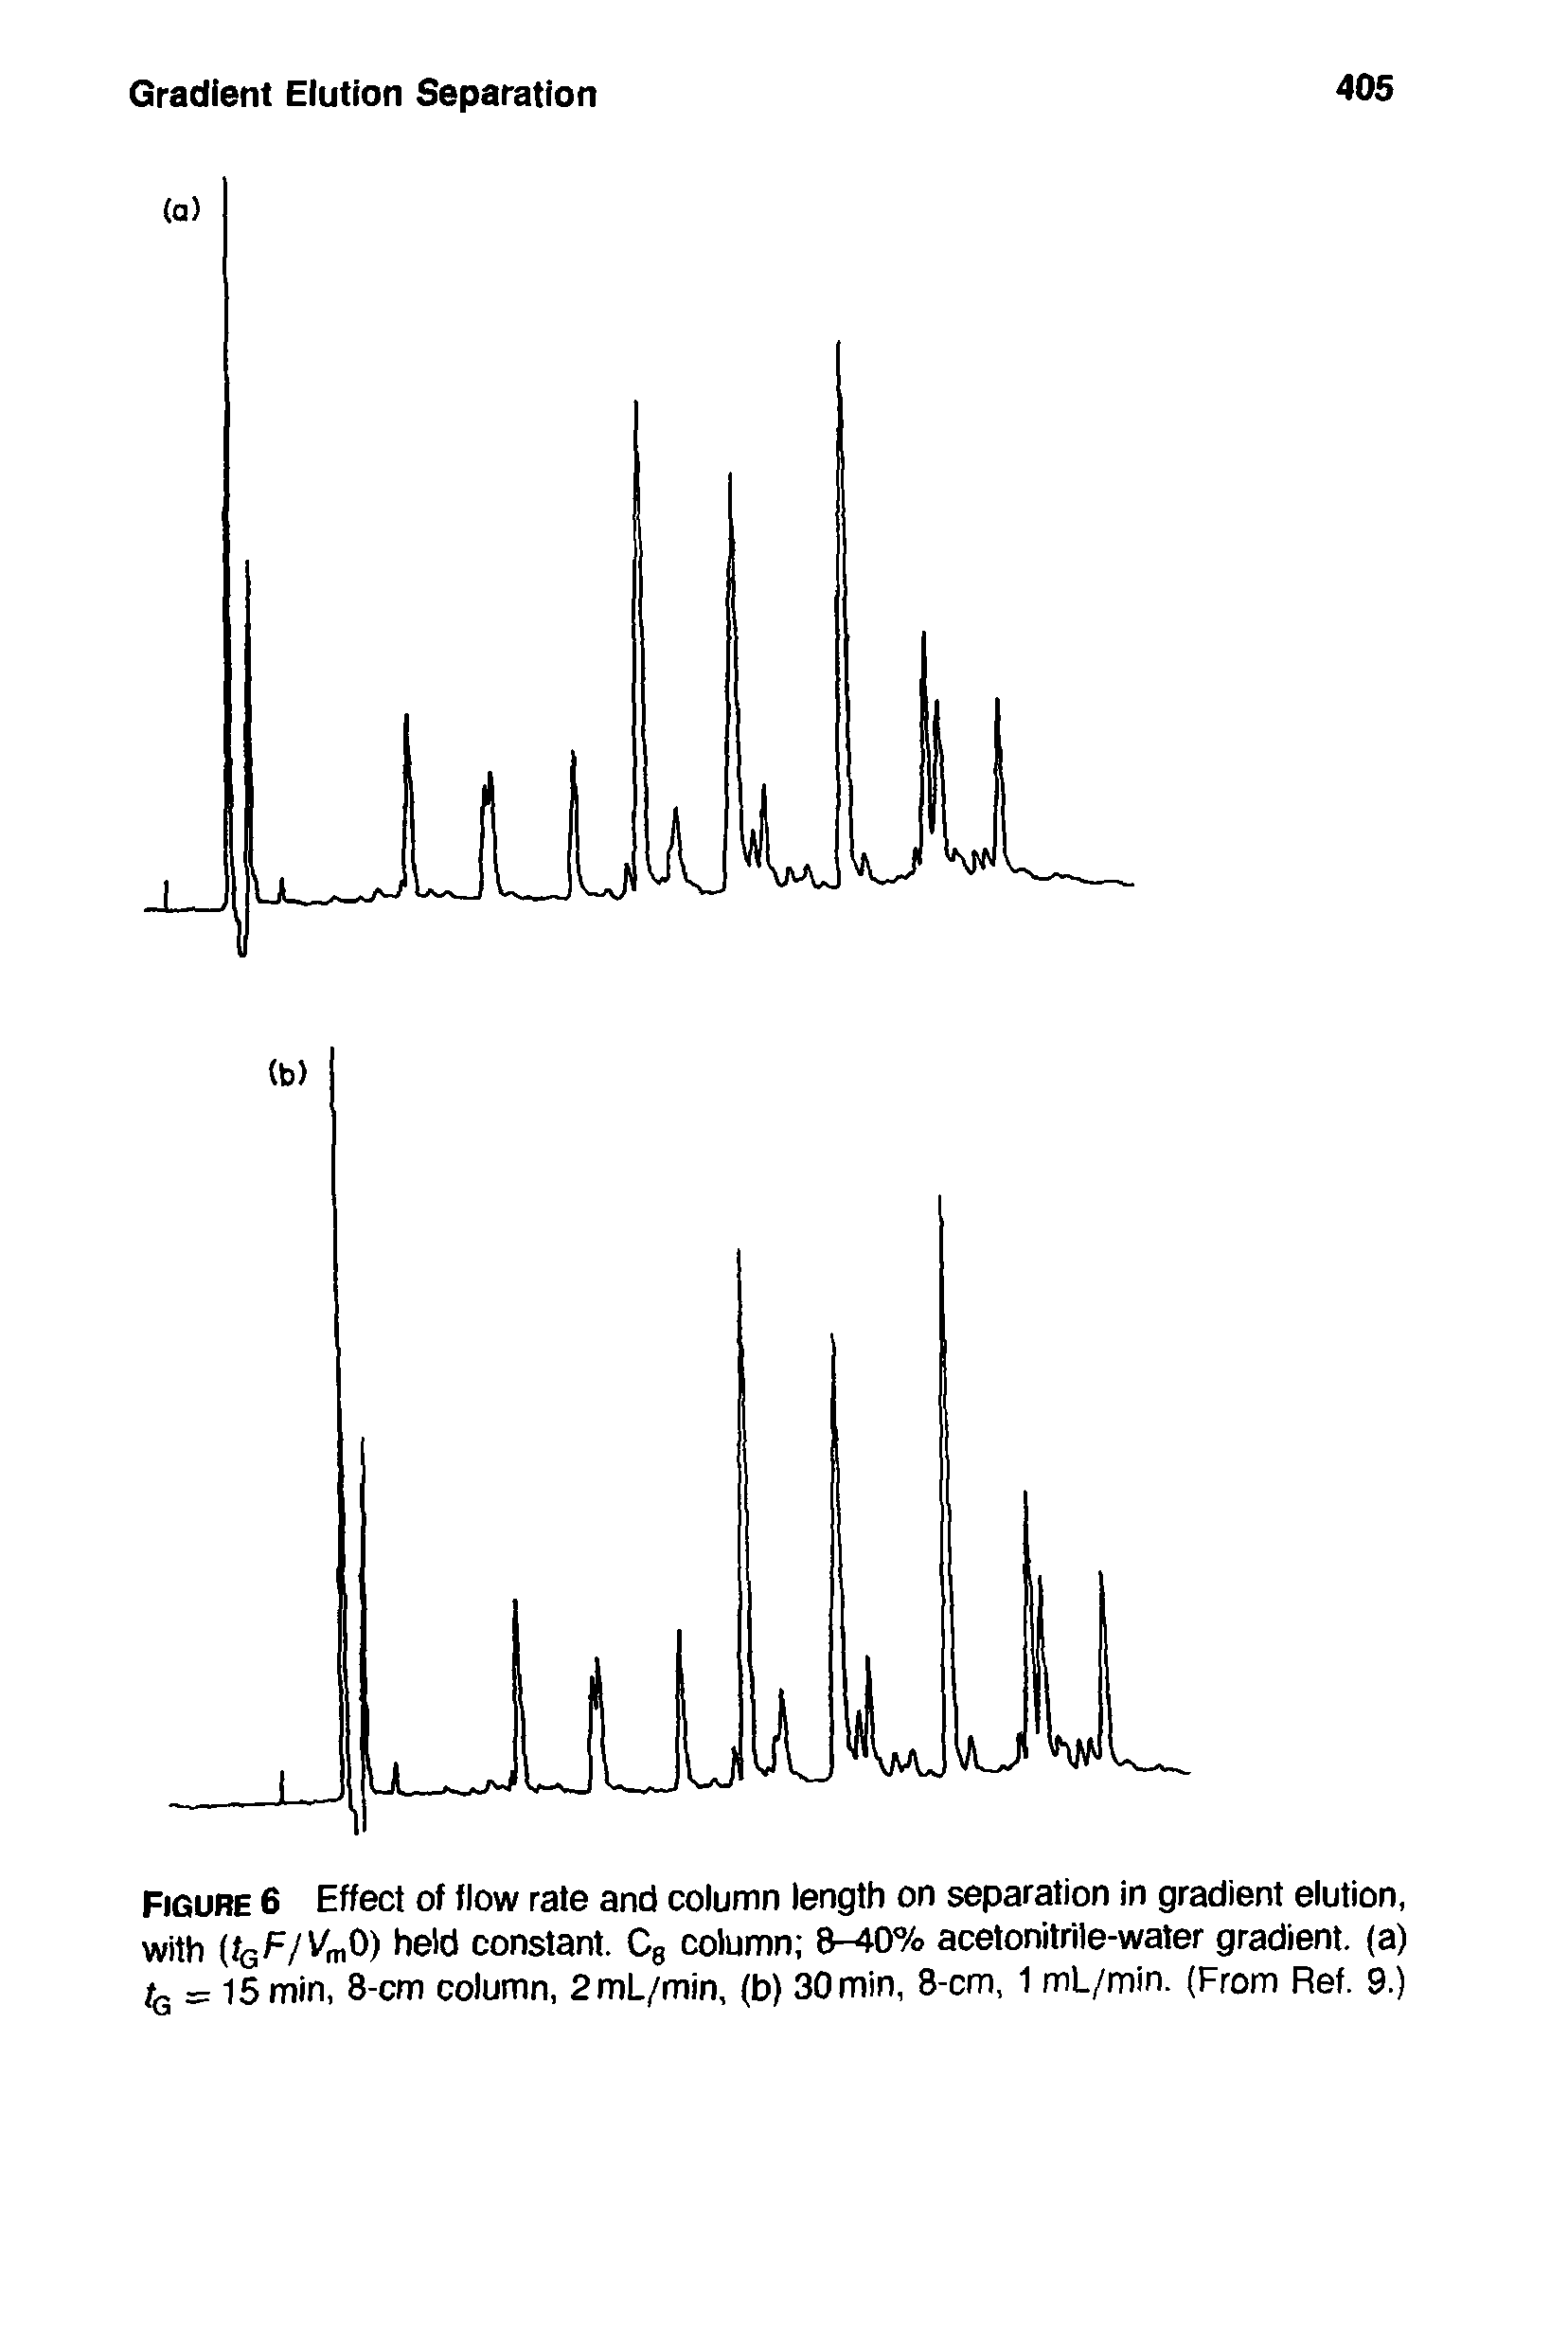 Figure 6 Effect of flow rate and column length on separation in gradient elution, with (fc /KnO) held constant. Cb column 8-40% acetonitrile-water gradient, (a) fo = 15 min, 8-cm column, 2mL/min, (b) 30 min, 8-cm, 1 mL/min. From Ref. 9.)...